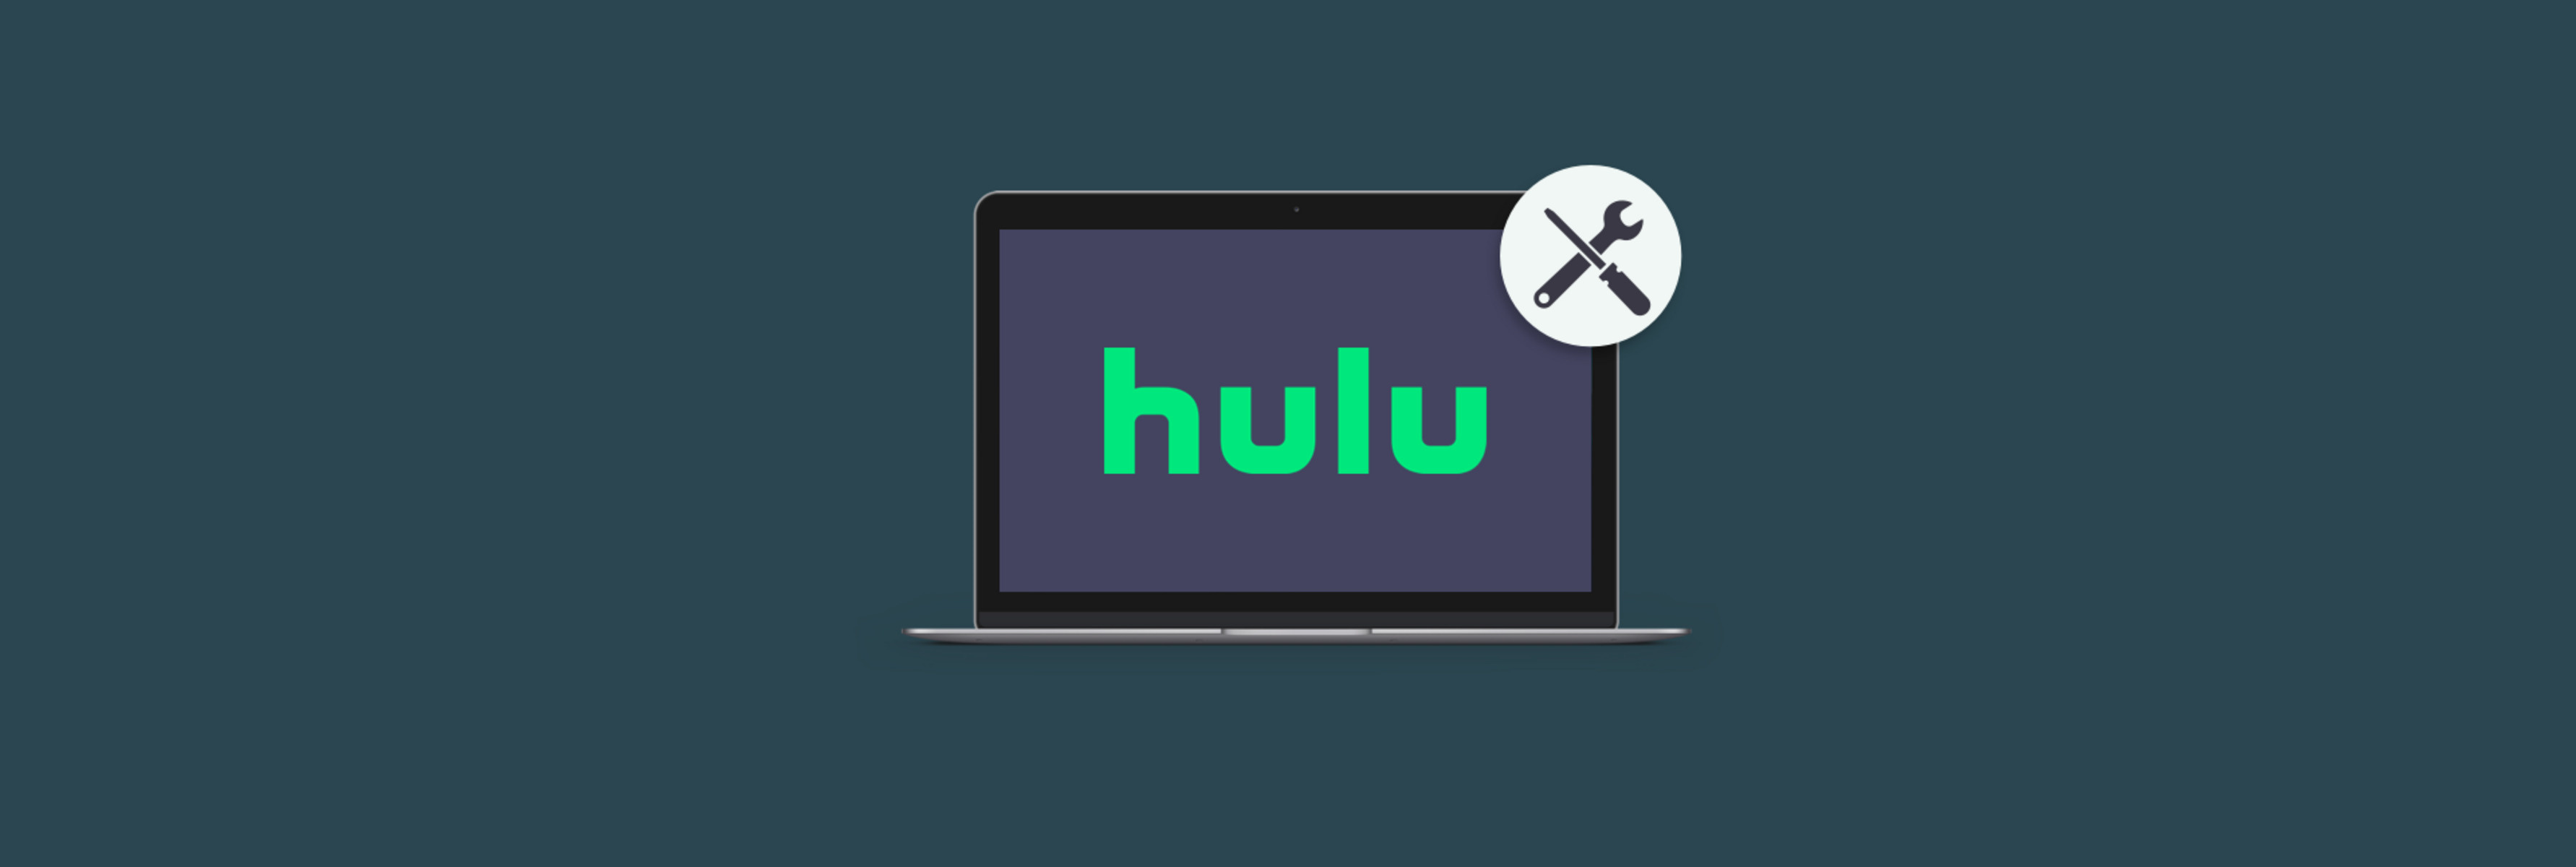 how to fix hulu streaming issues